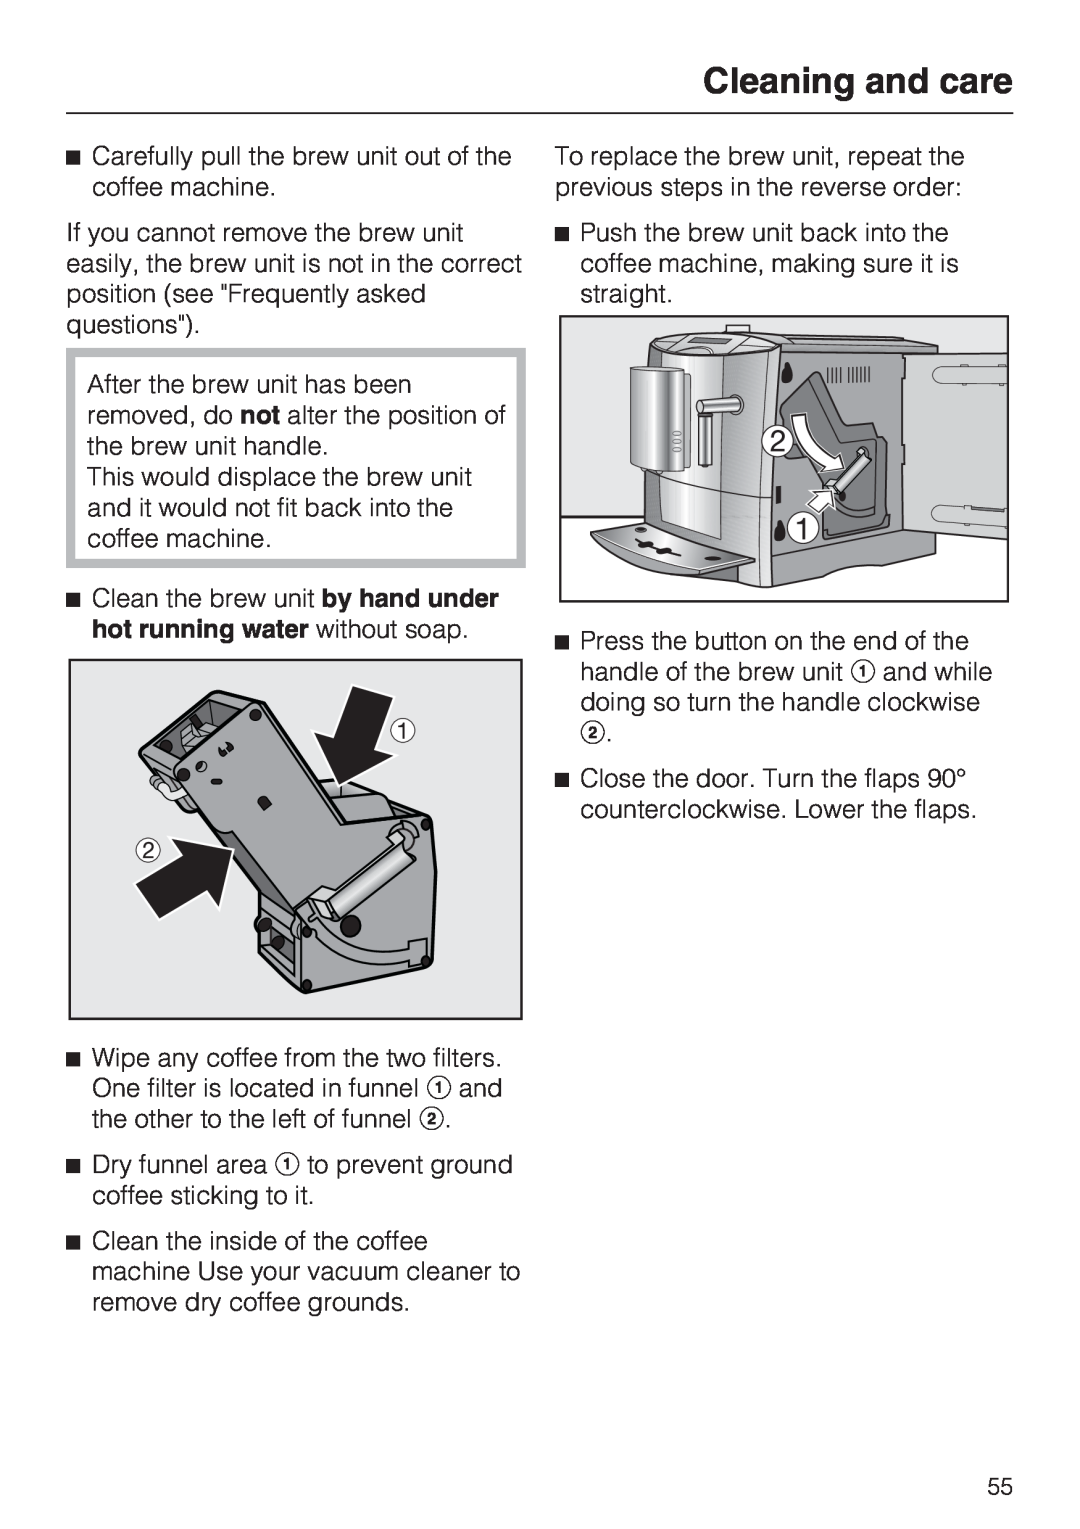 Miele CM 5200 manual Cleaning and care, Carefully pull the brew unit out of the coffee machine 